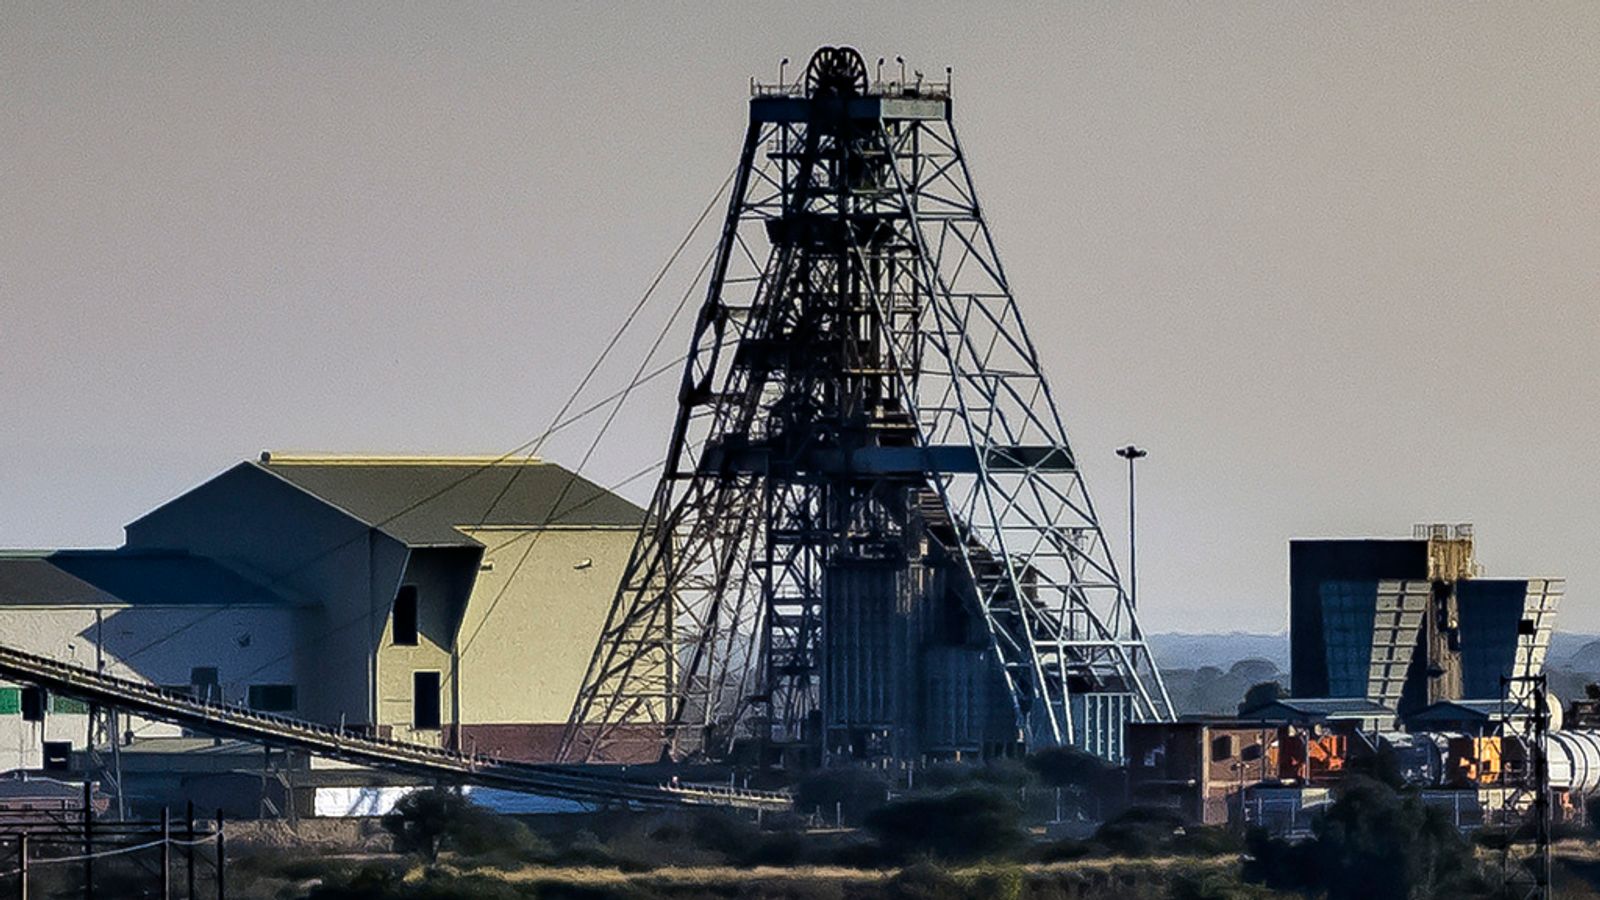 South Africa mine lift plummets 200m killing 11 people and injuring more